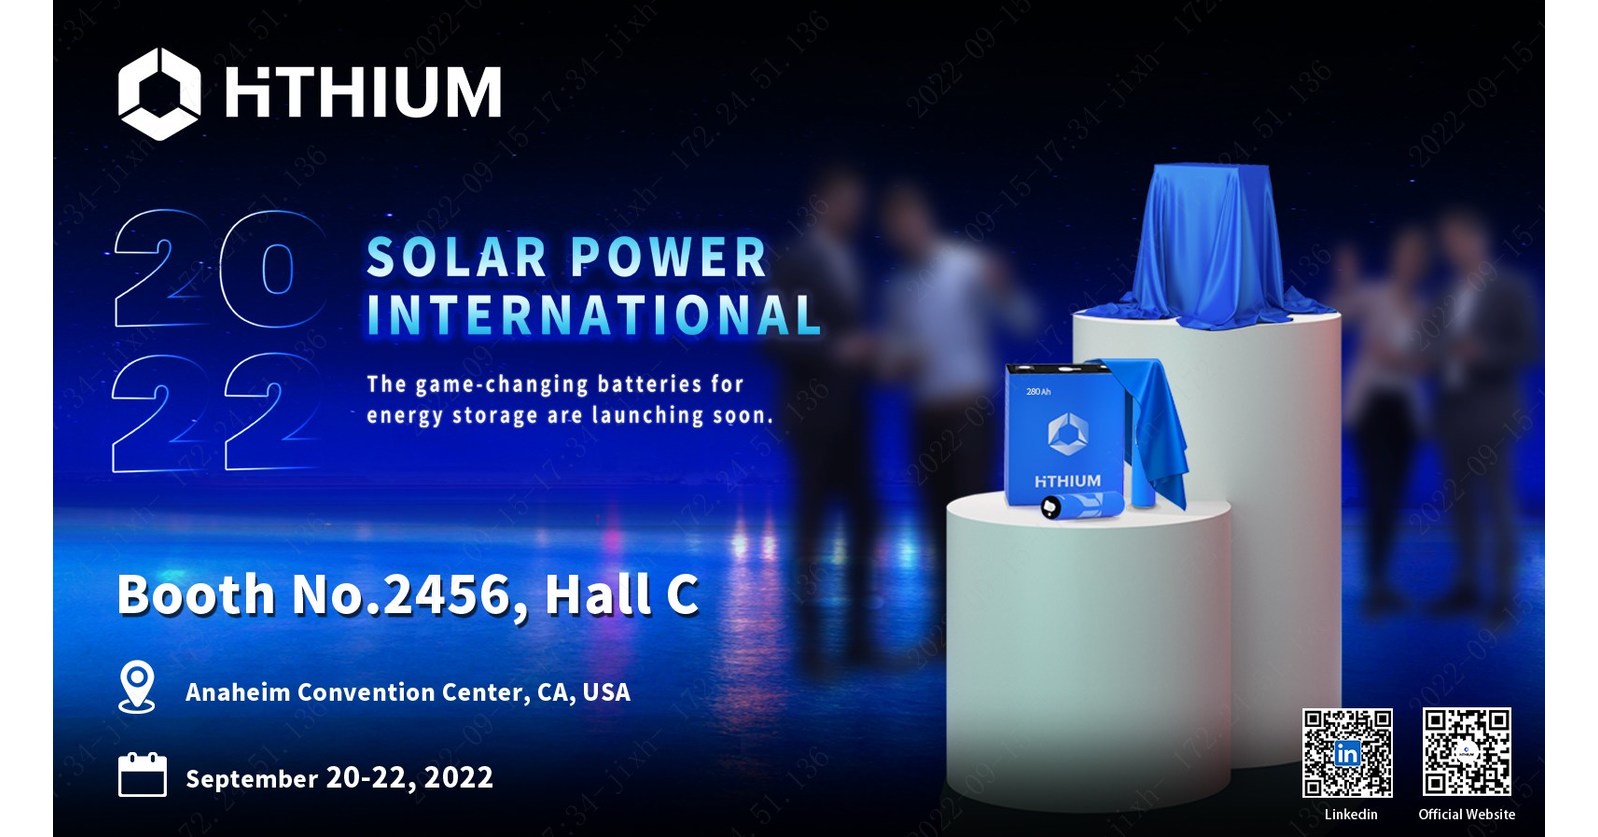 Hithium Sets to Participate in RE+ 2022 Solar Power International and